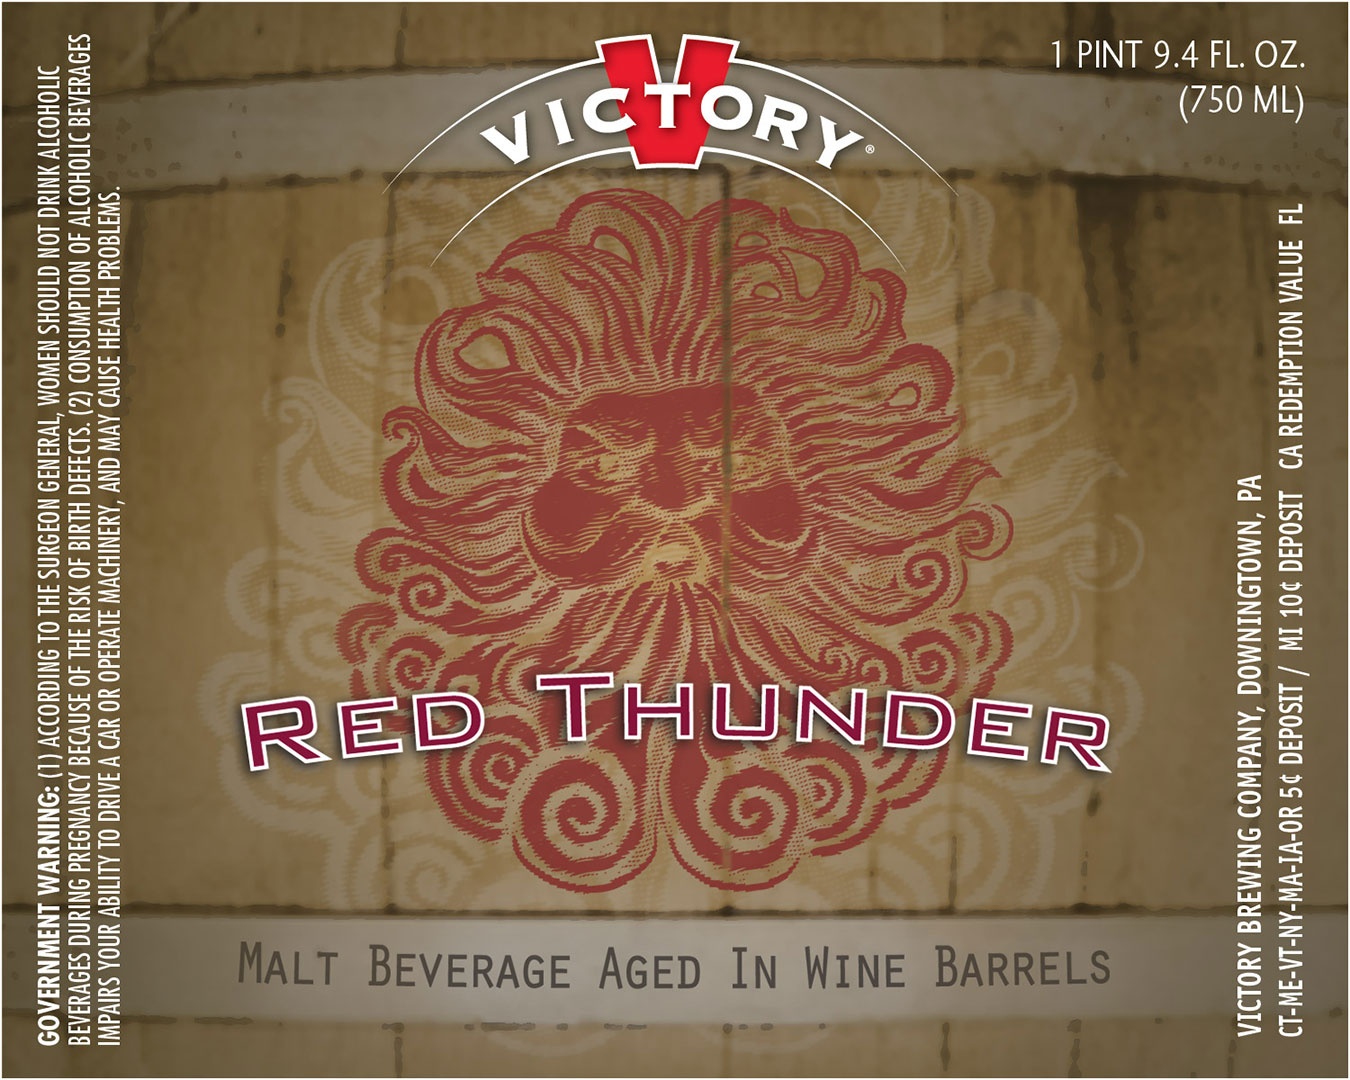 Victory Red Thunder